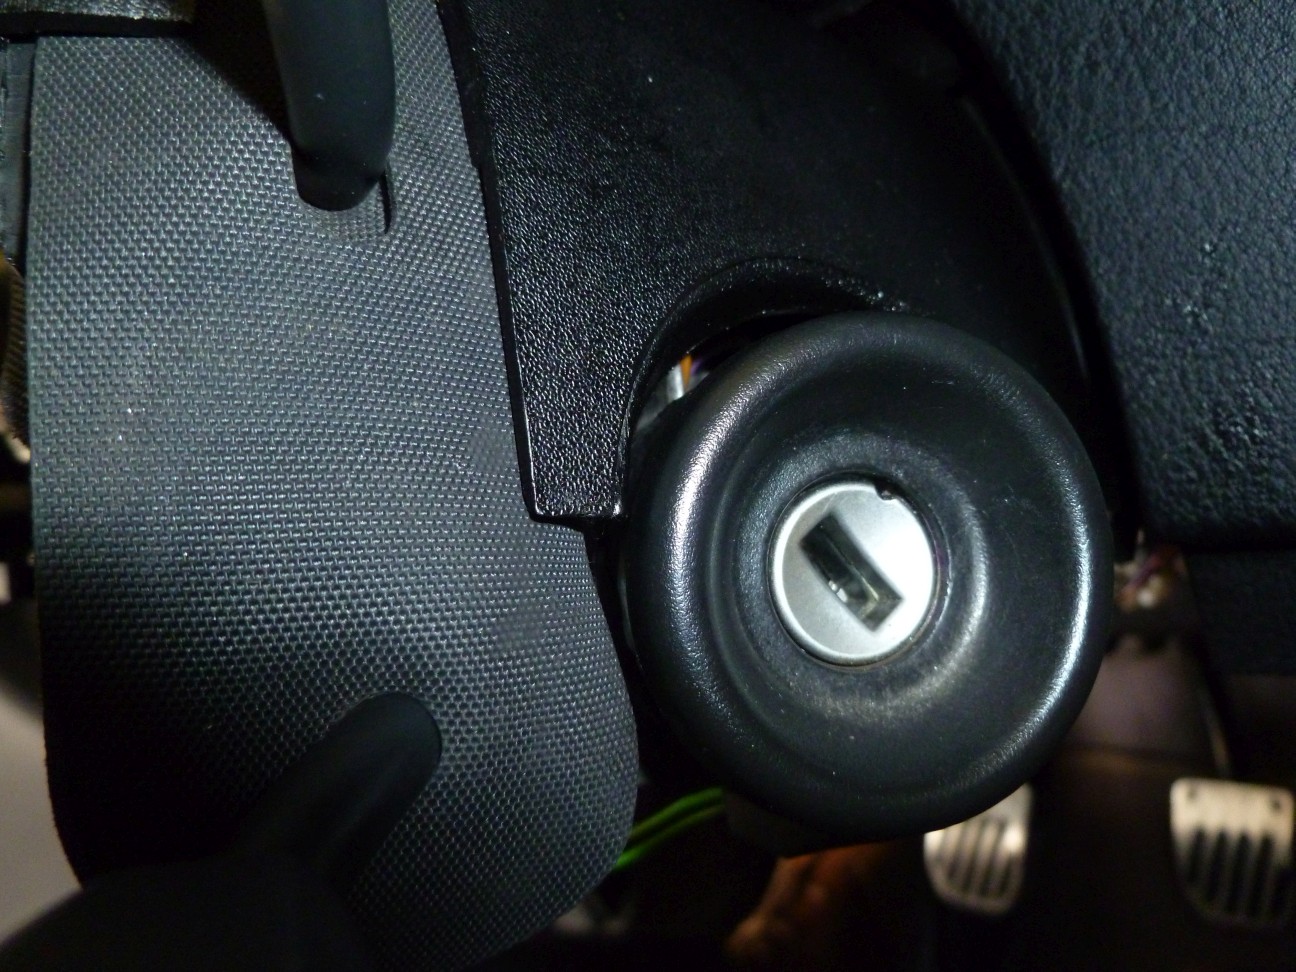 DIY: spinning key problem - repair the ignition switch to lock cylinder ...